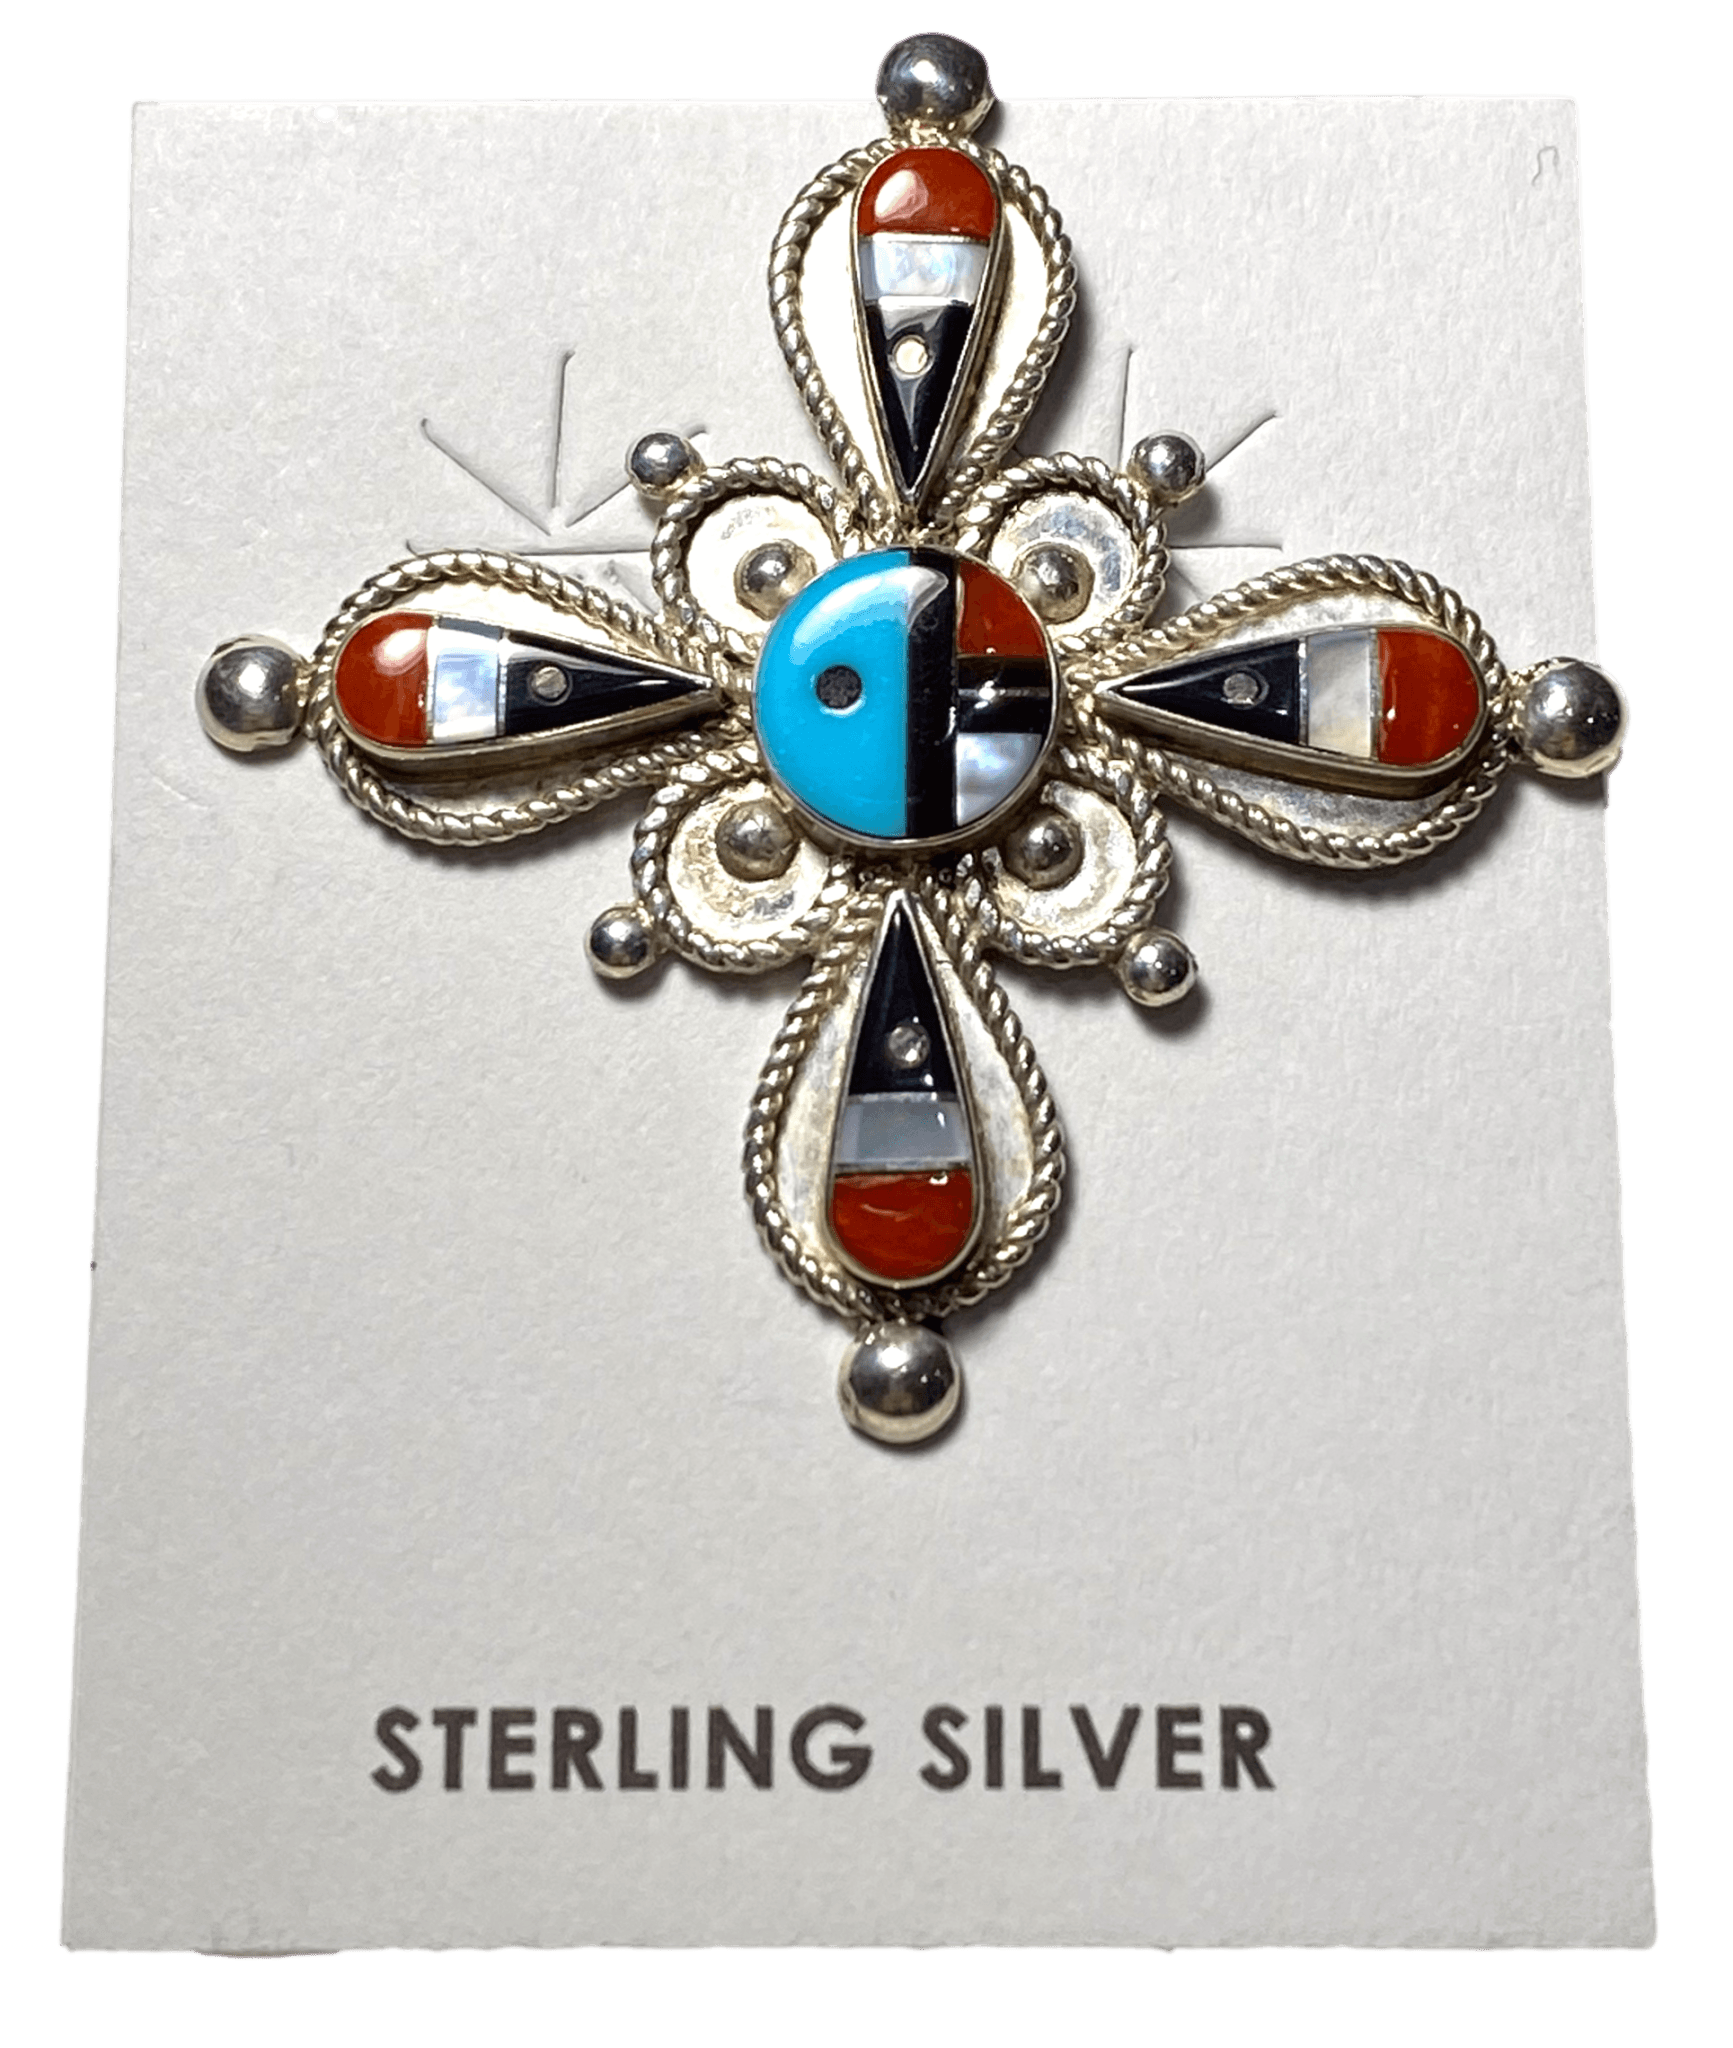 Pendant Sterling Silver Turquoise Coral Jet Accent Cross Handcrafted by New Mexico Artisan 1 1/2 L x 1 1/2 W inches - Ysleta Mission Gift Shop- VOTED El Paso's Best Gift Shop